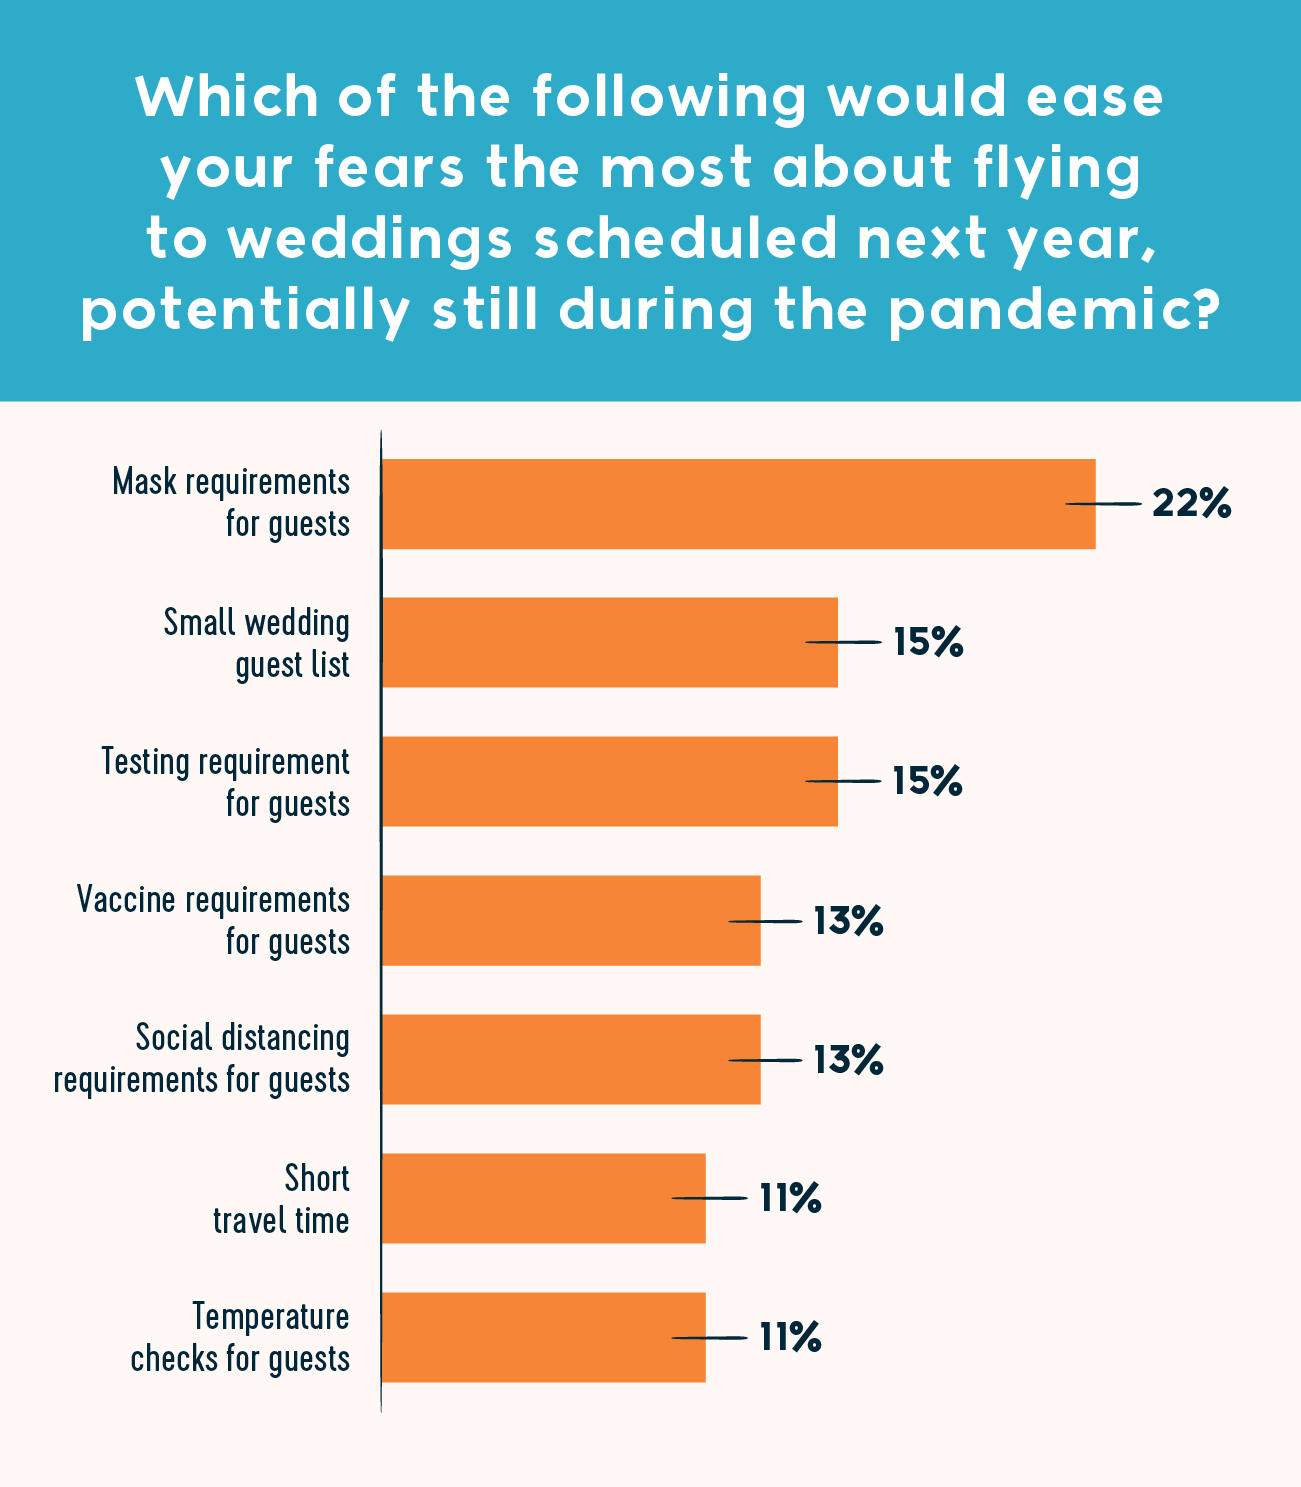 which of the following would ease your fears the most about flying to weddings scheduled next year, potentially still during the pandemic